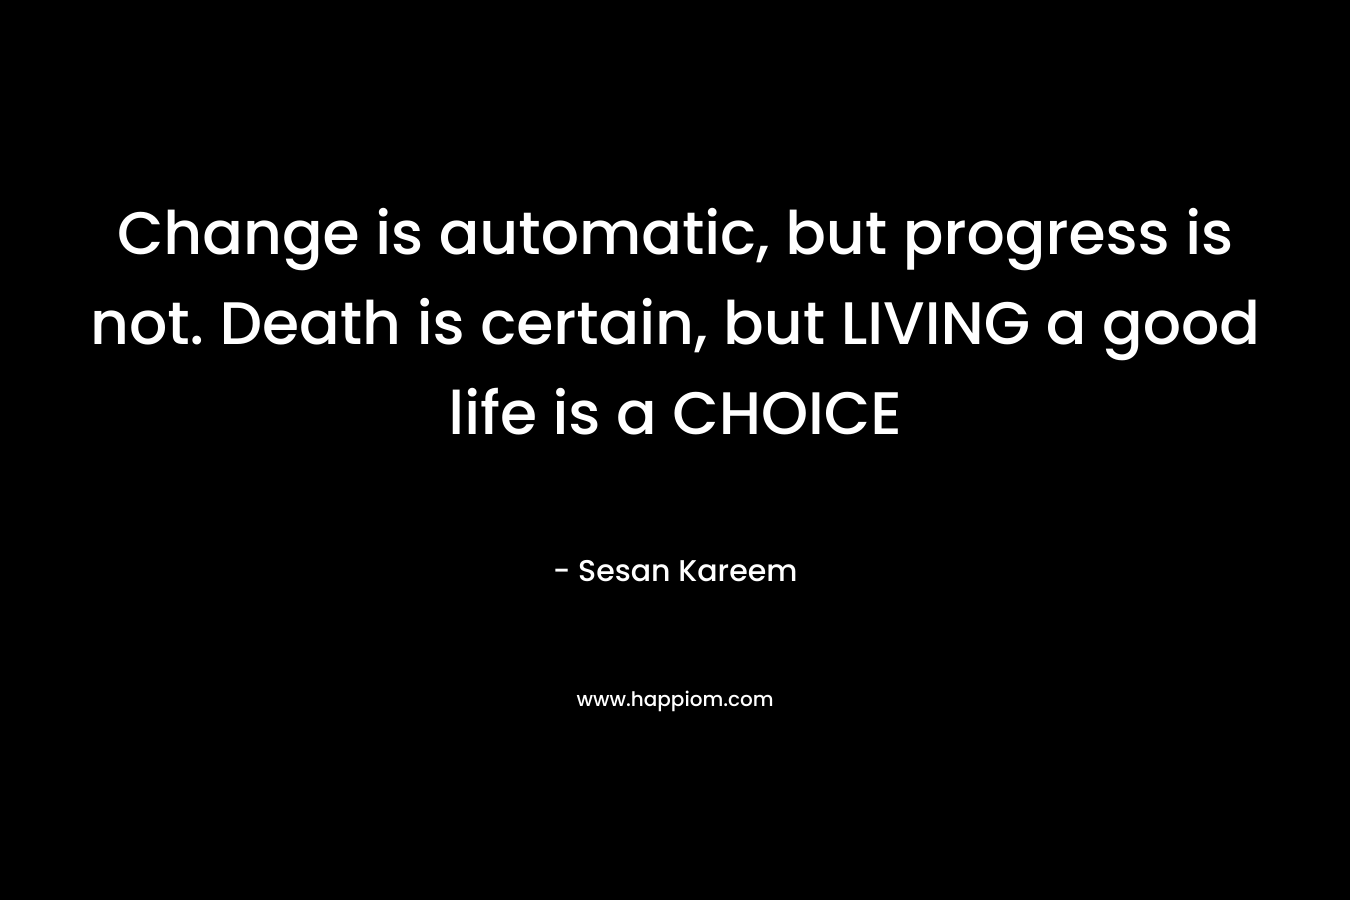 Change is automatic, but progress is not. Death is certain, but LIVING a good life is a CHOICE – Sesan Kareem